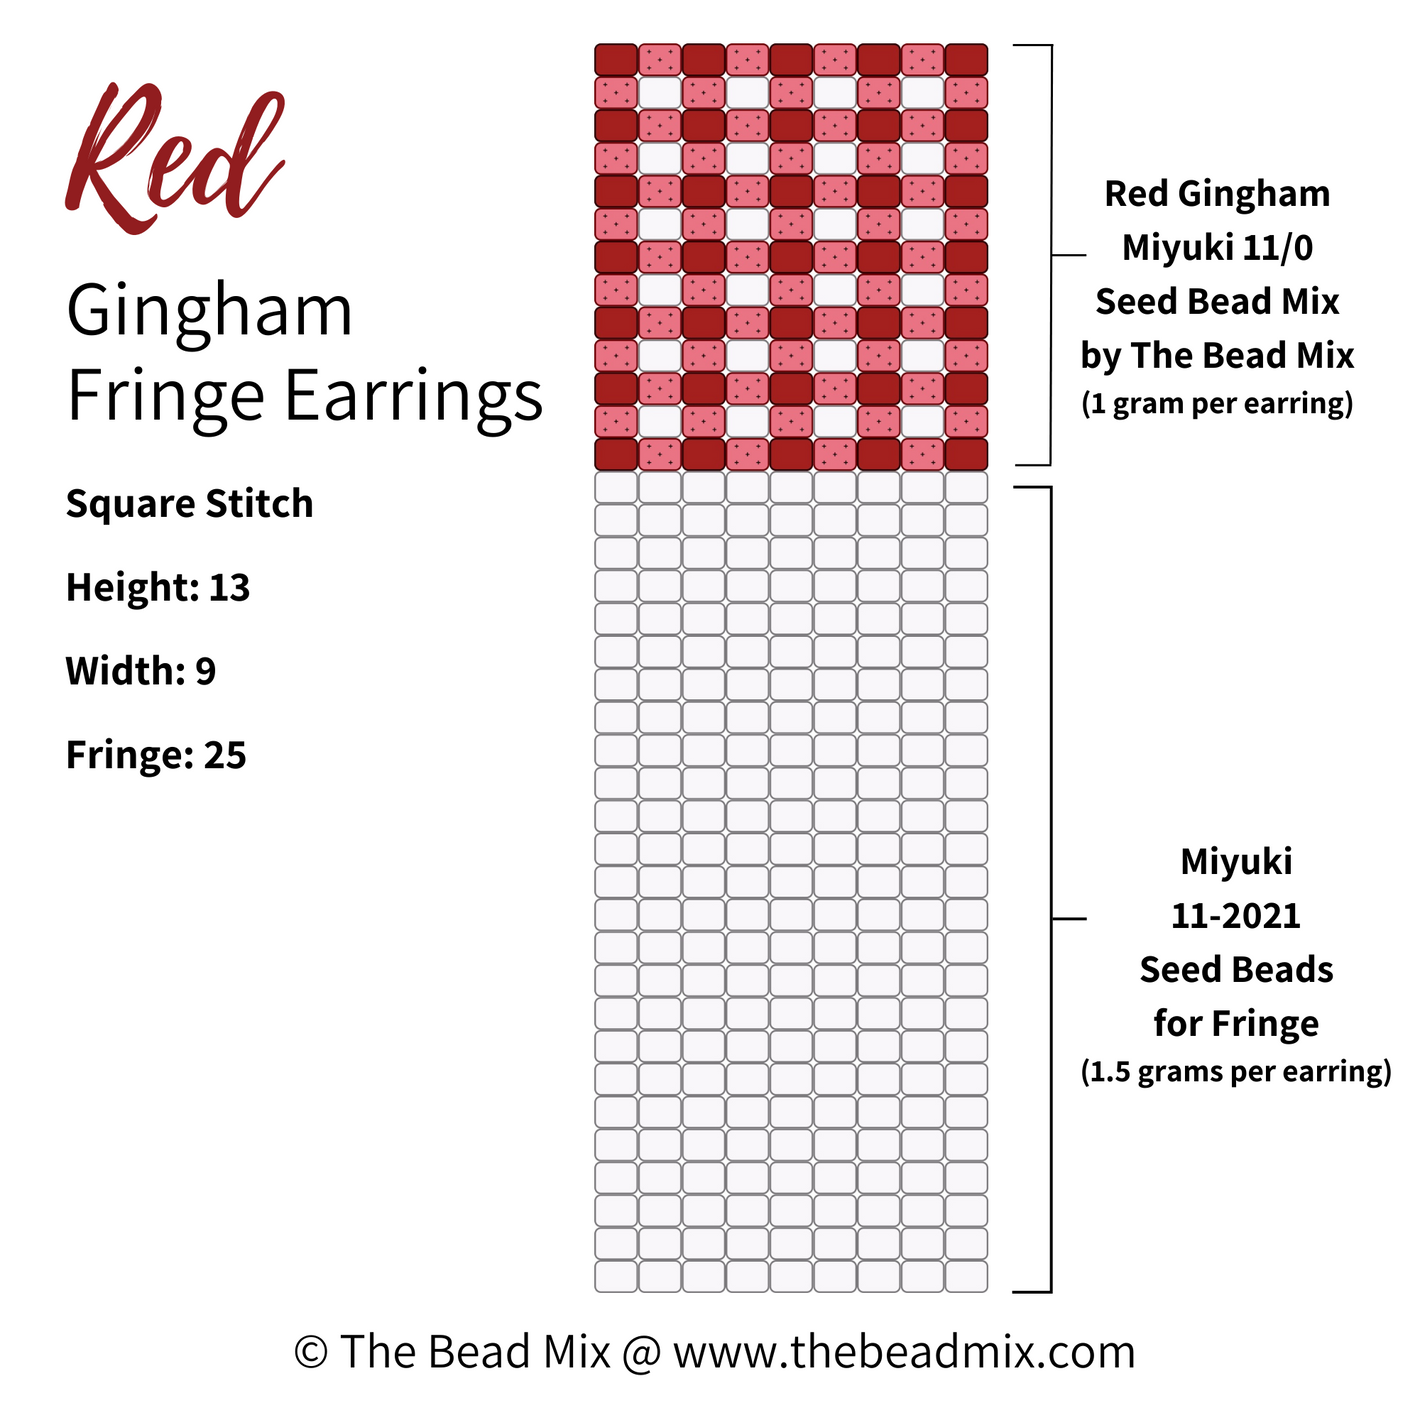 Free square stitch beading pattern to make red gingham pattern fringe earrings by The Bead Mix